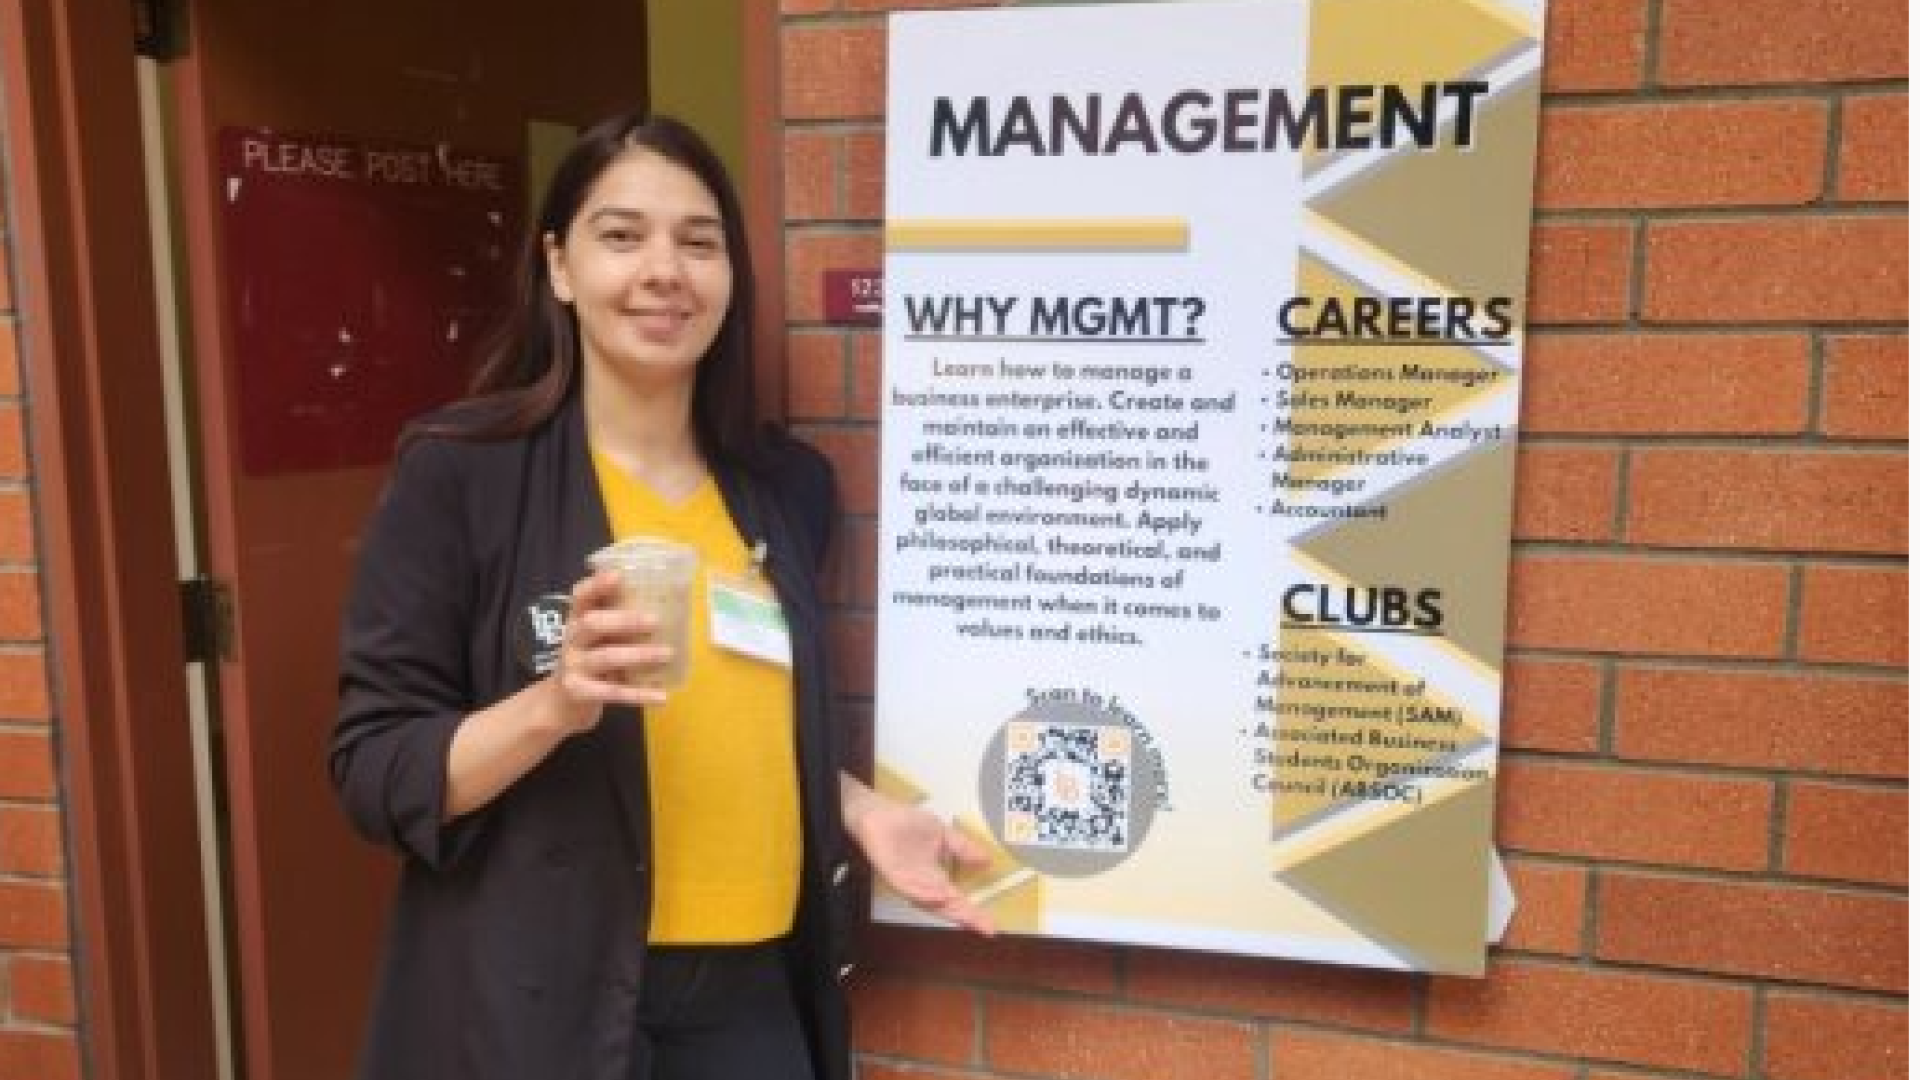 Management Administrative Support Coordinator Edilu Medina welcome prospective students to the Management Showcase